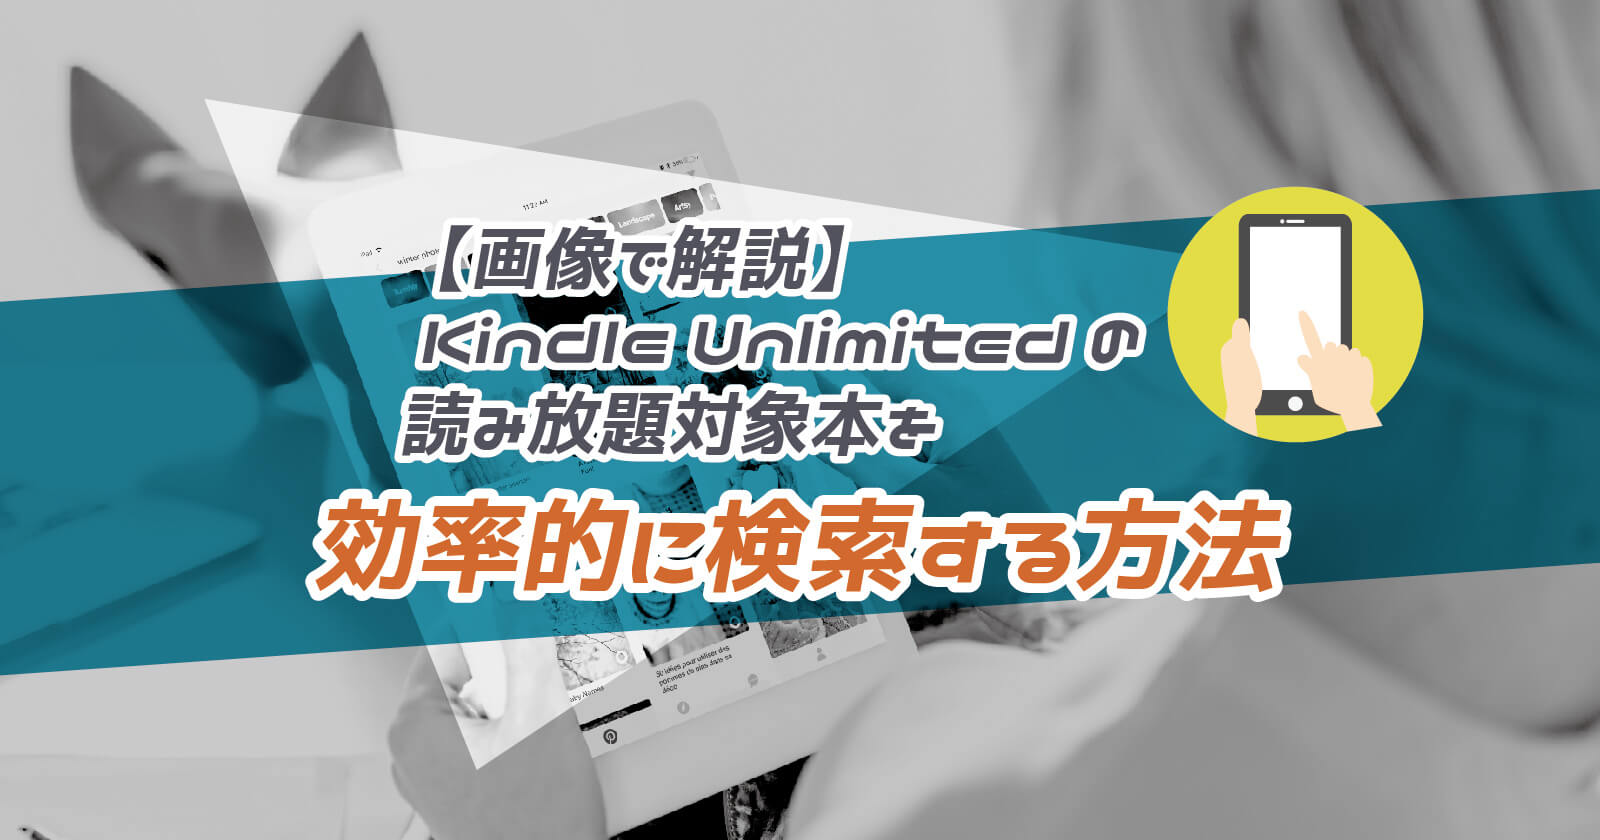 Kindle Unlimited対象本の効率的な検索方法 画像付きで探し方を徹底解説 To Be Soldout